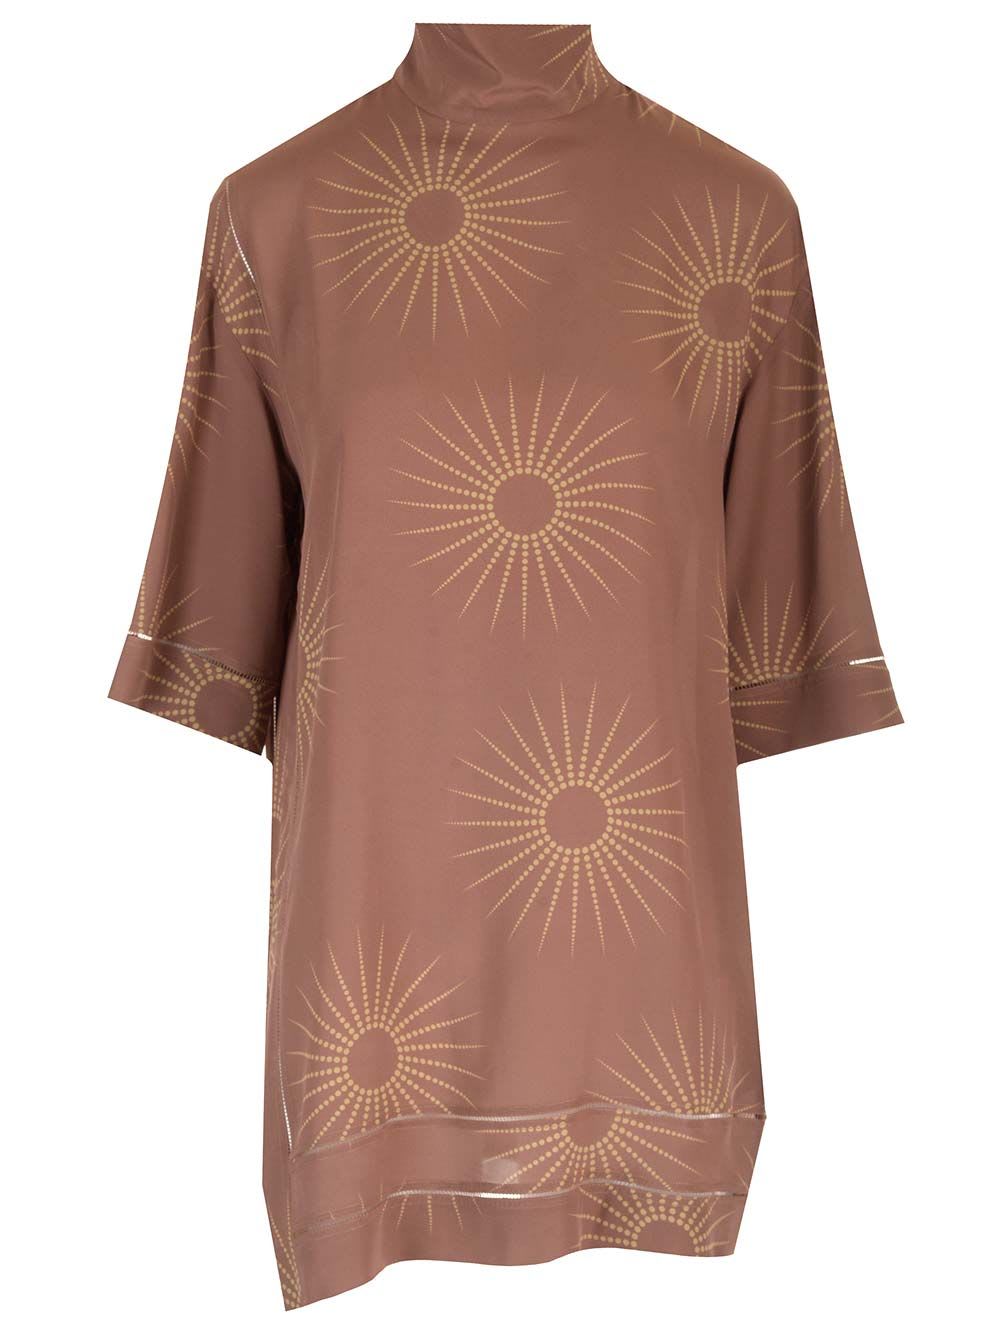 Tunic-style Top